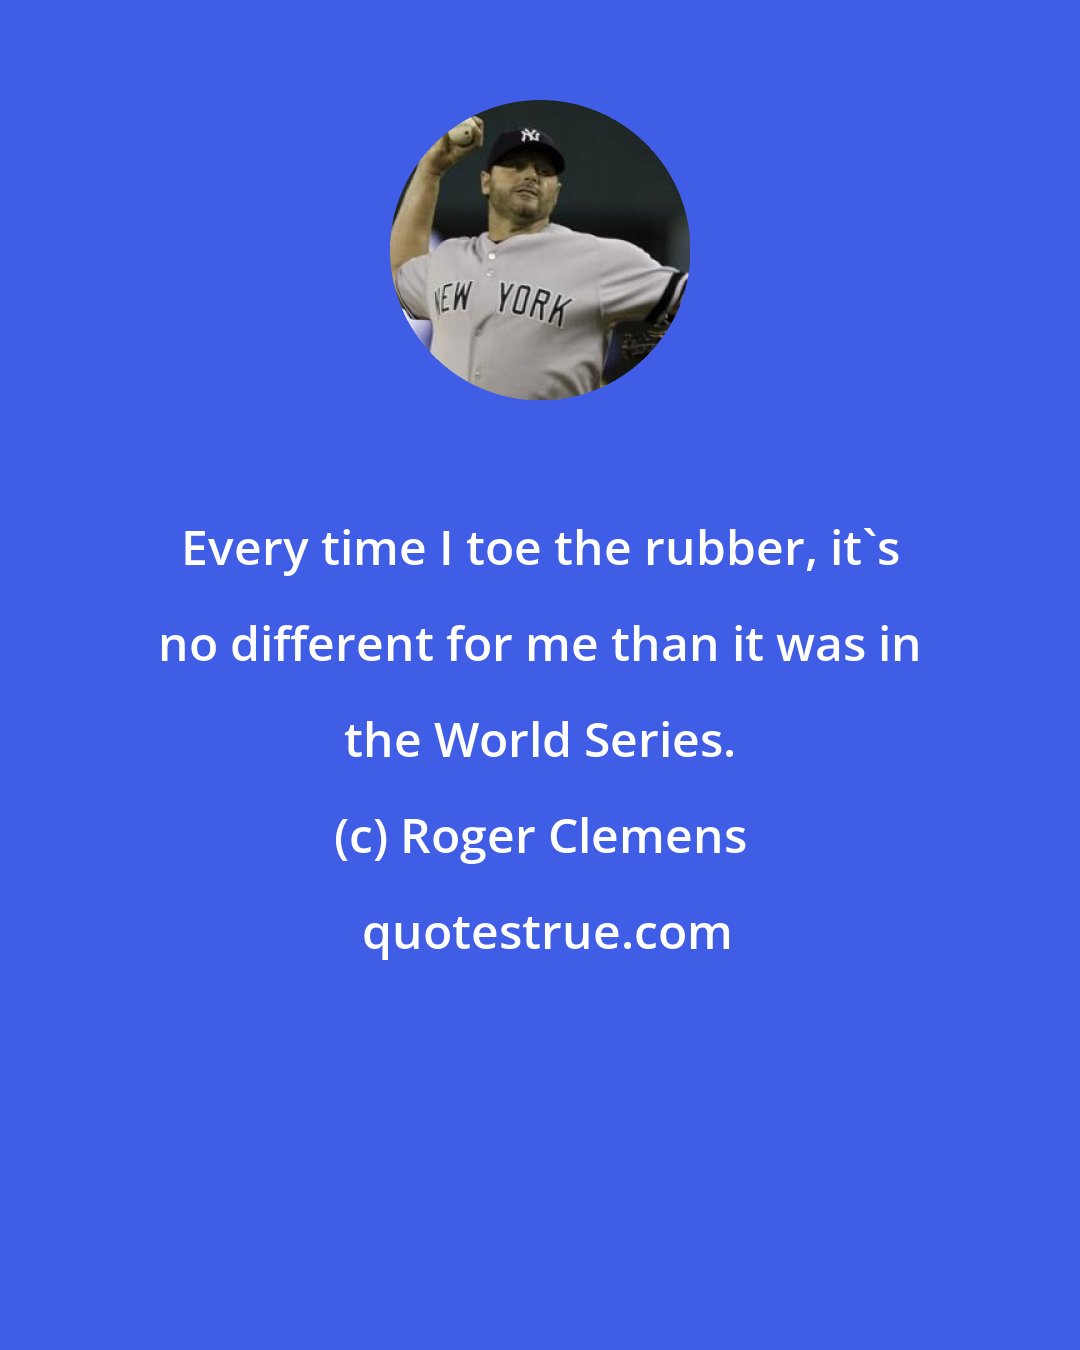 Roger Clemens: Every time I toe the rubber, it's no different for me than it was in the World Series.